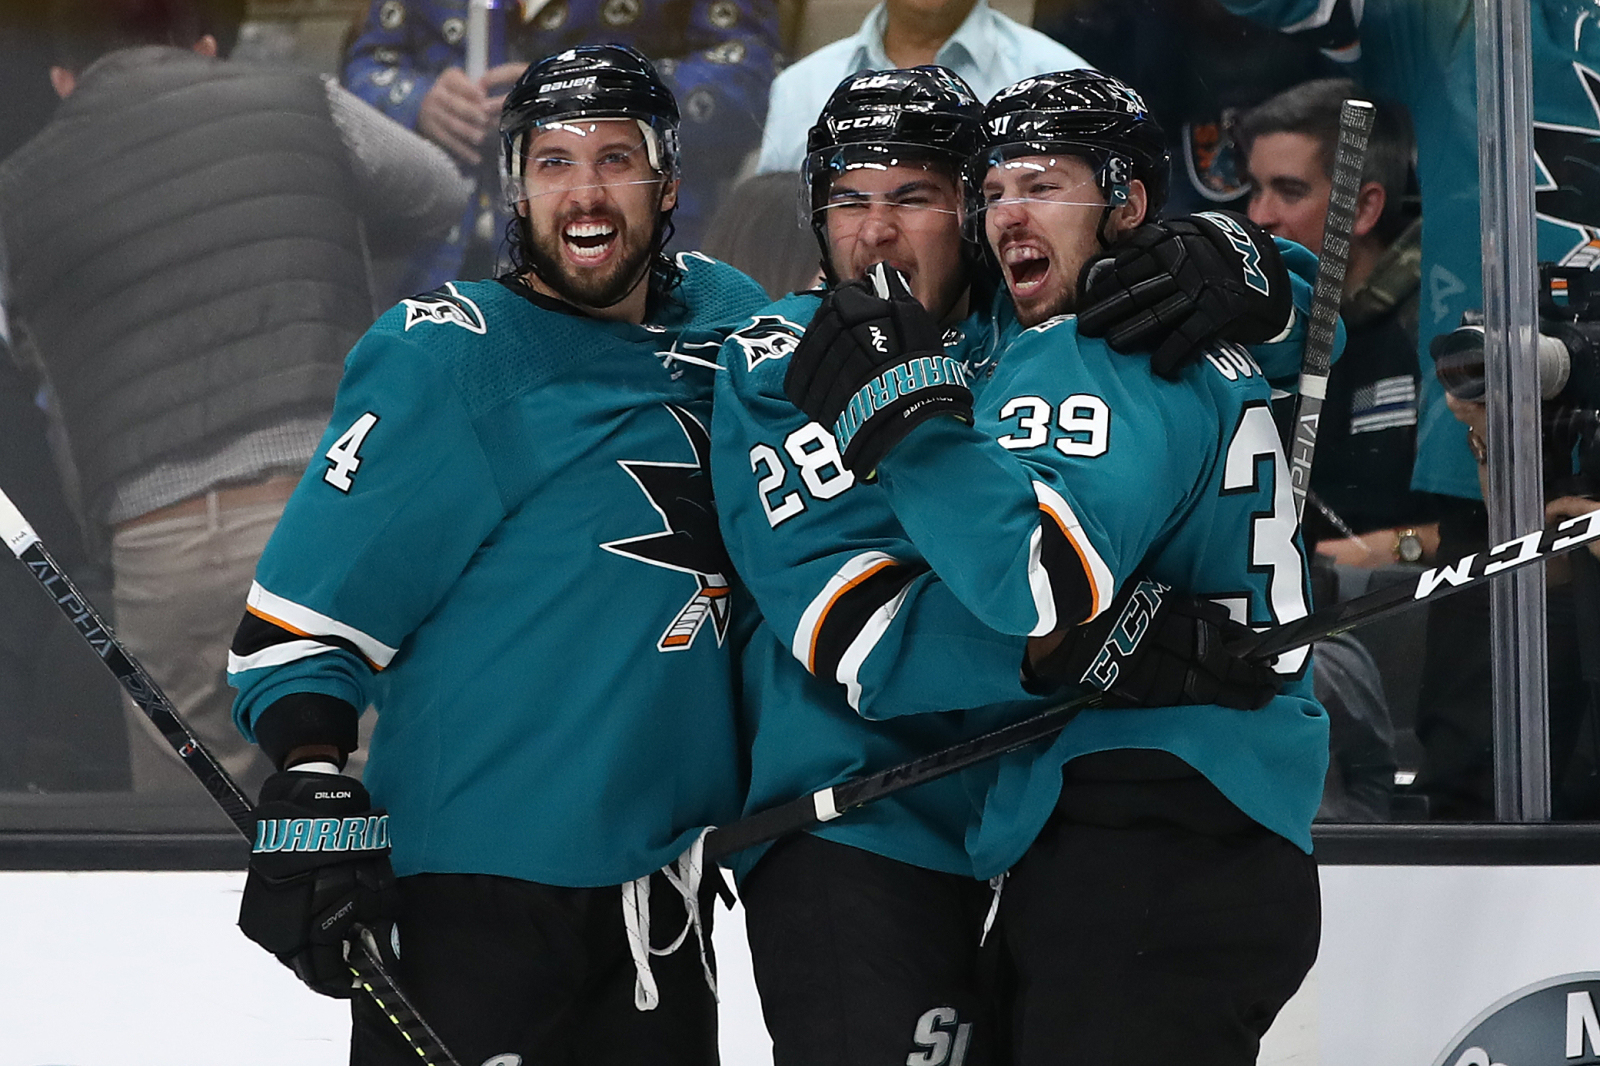 Logan Couture Named Sharks Captain, Tenth In Franchise History